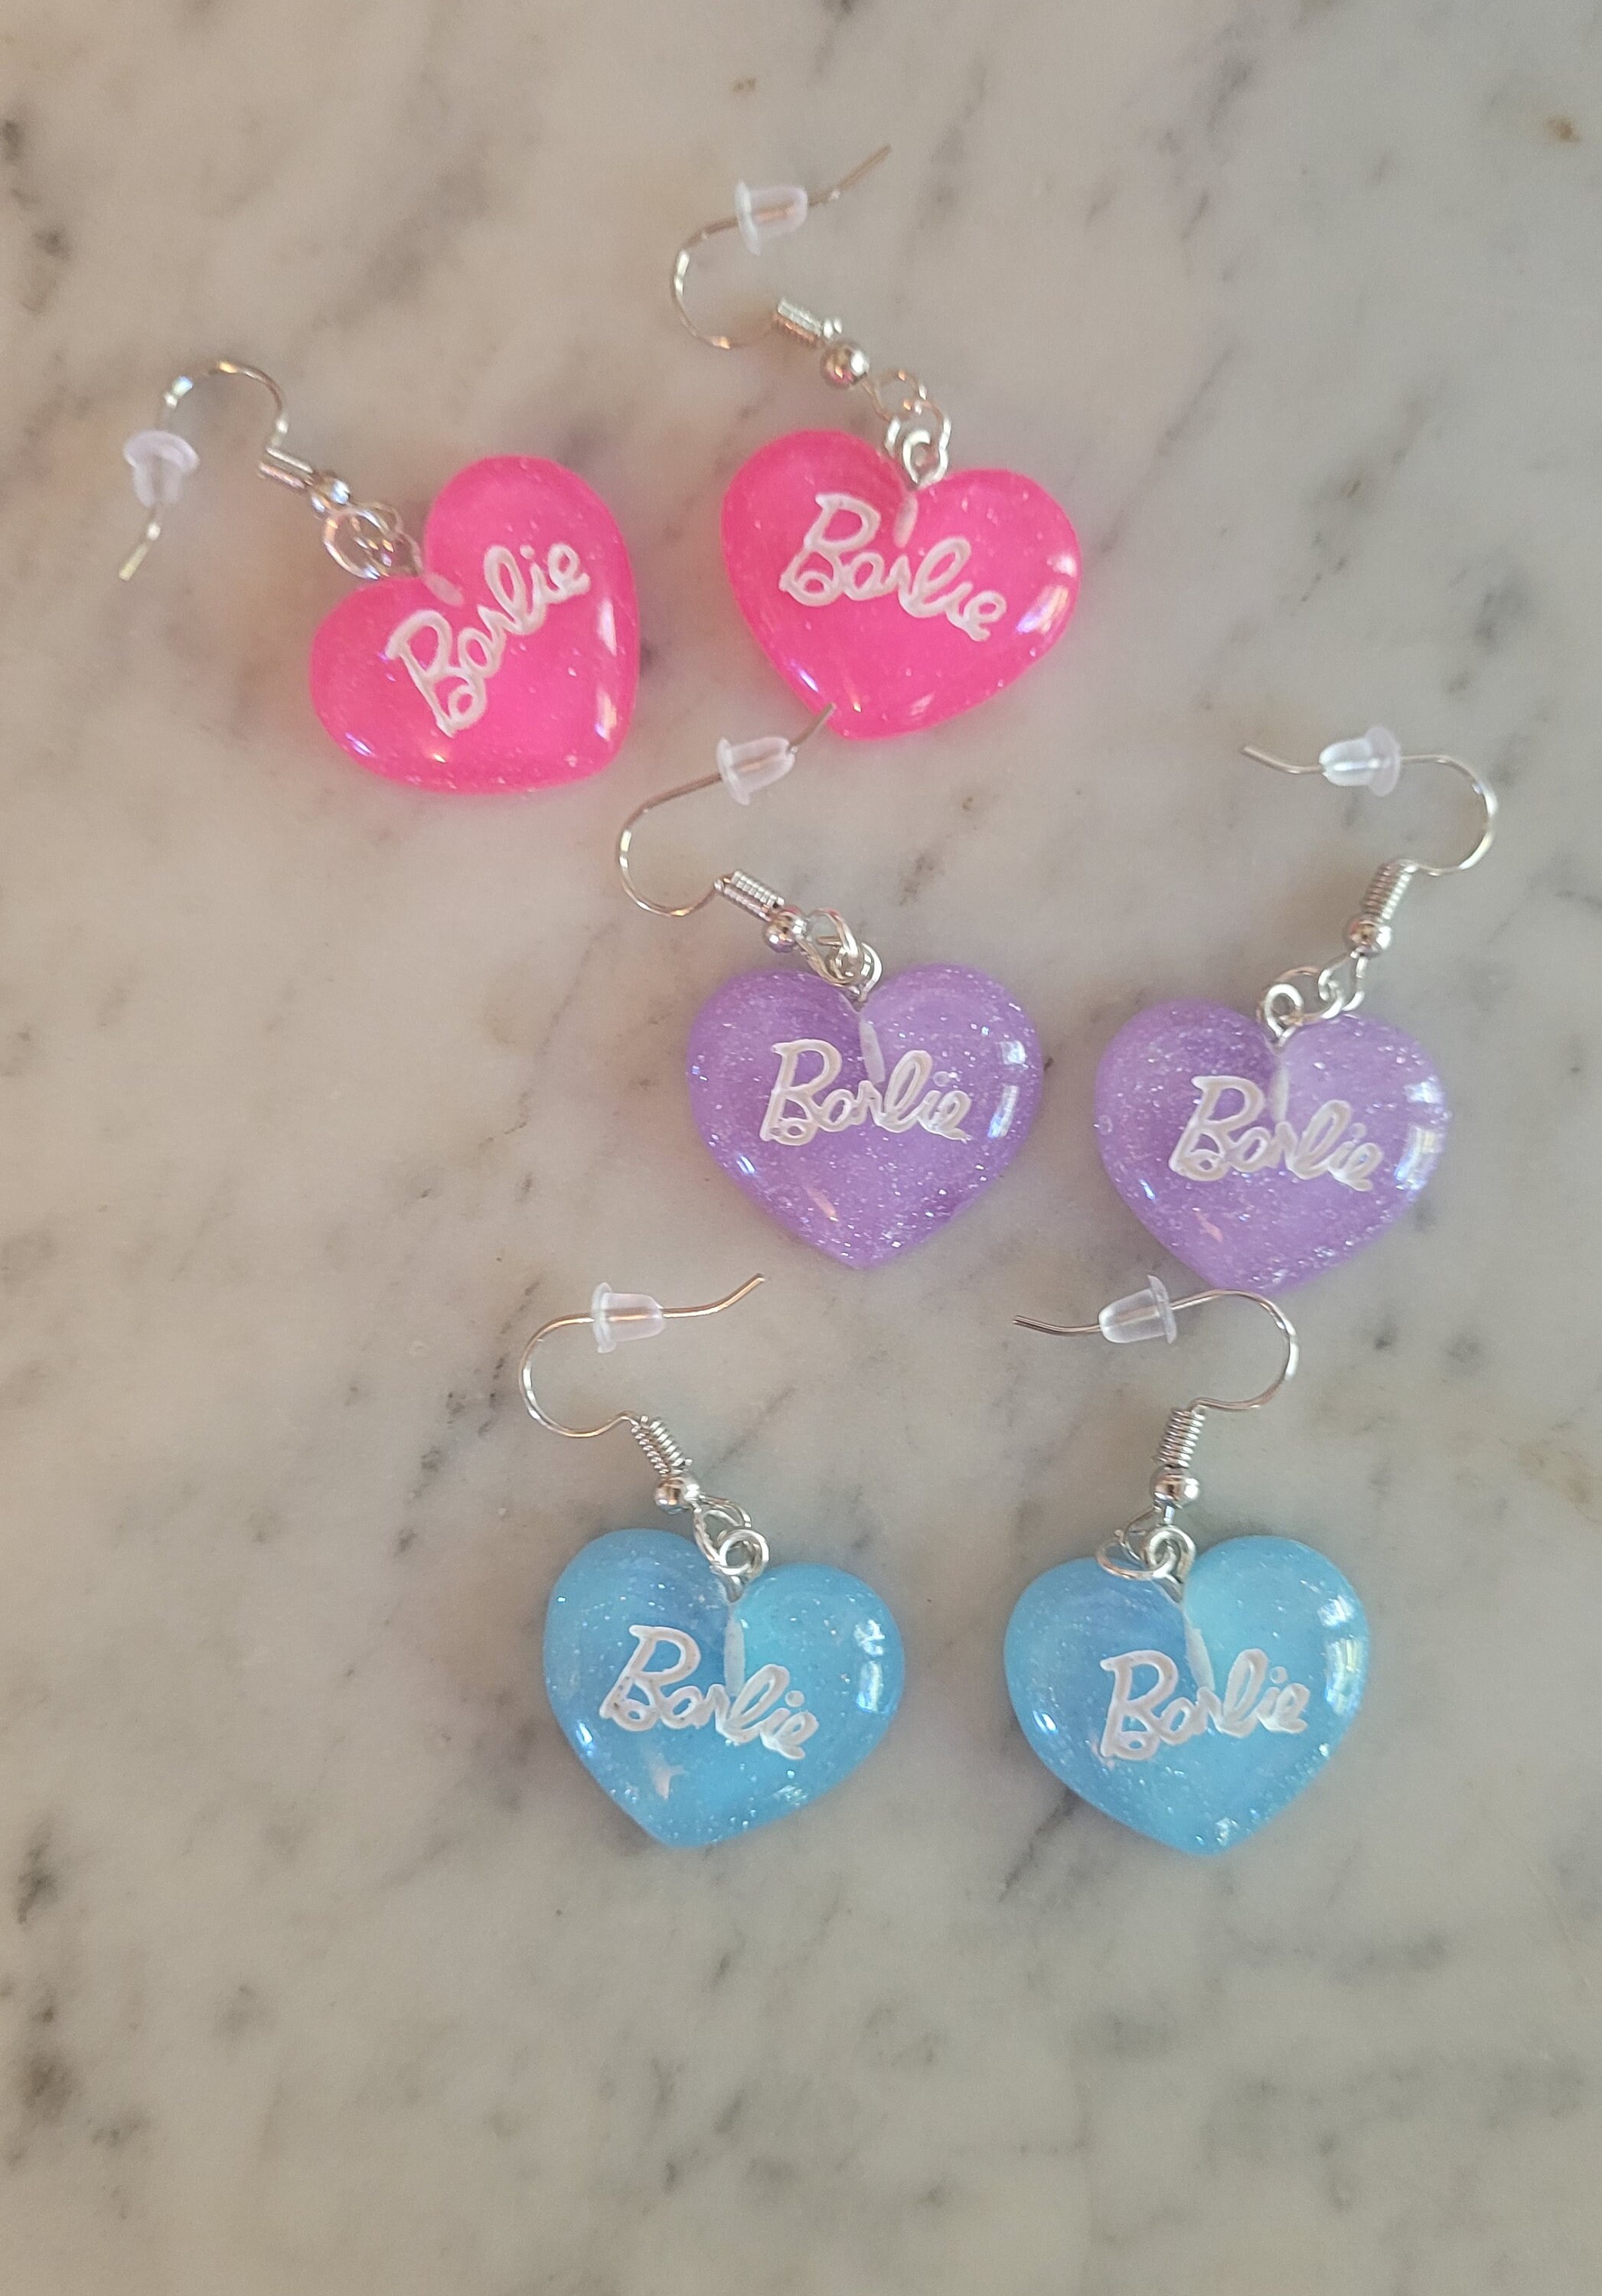 Barbie Core Pink Chunky Glitter Heart Shaped Earrings Barbie Girl Jewelry  for Little Girls Retro Style Neon Pink Aesthetic Sparkle 